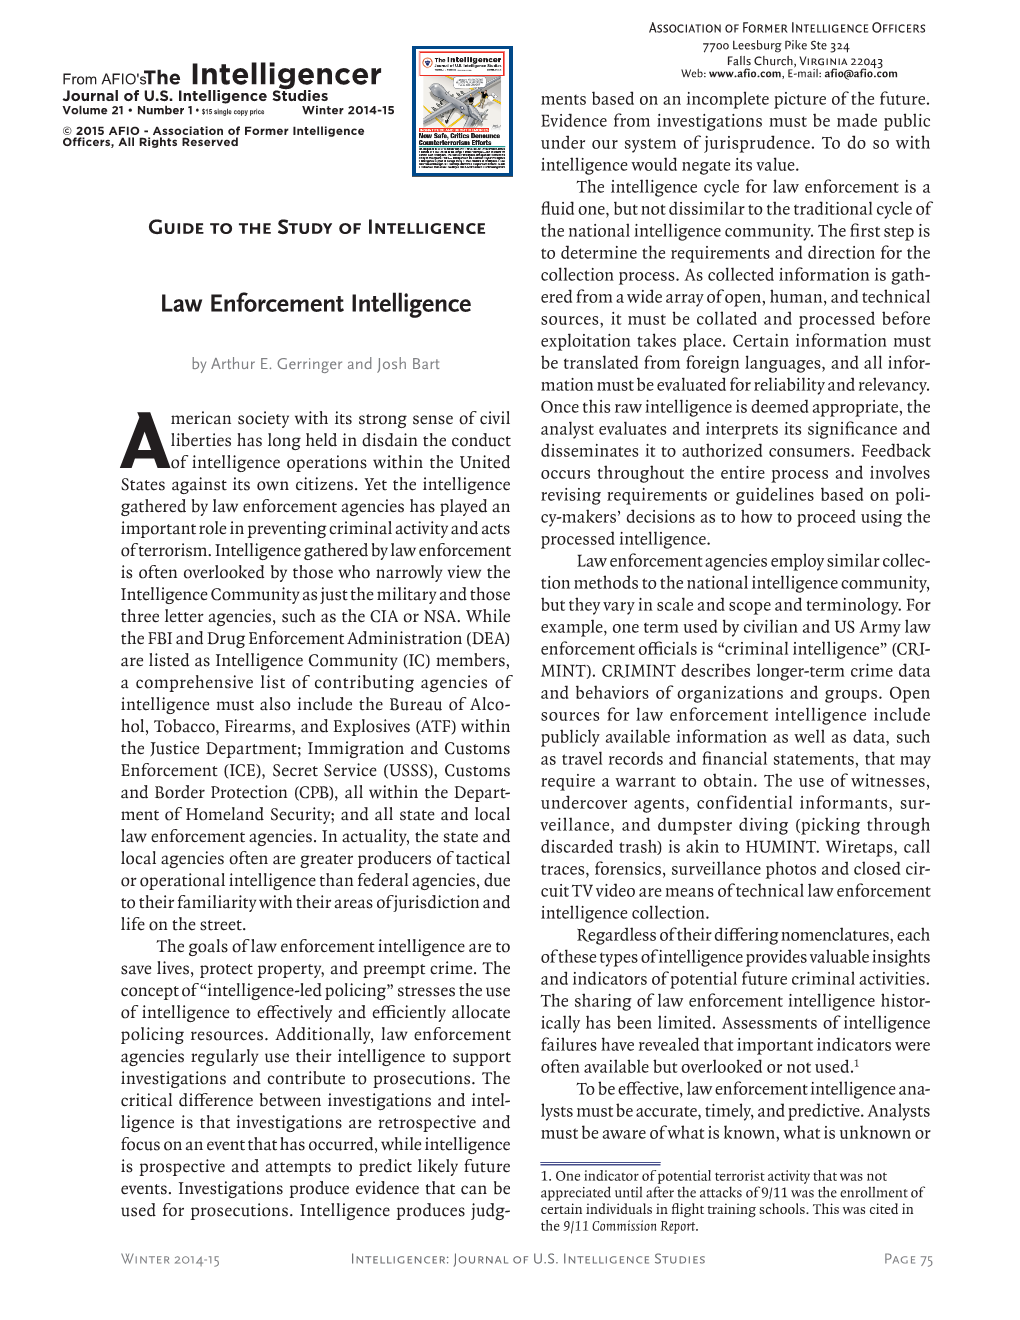 A Guide to Law Enforcement Intelligence